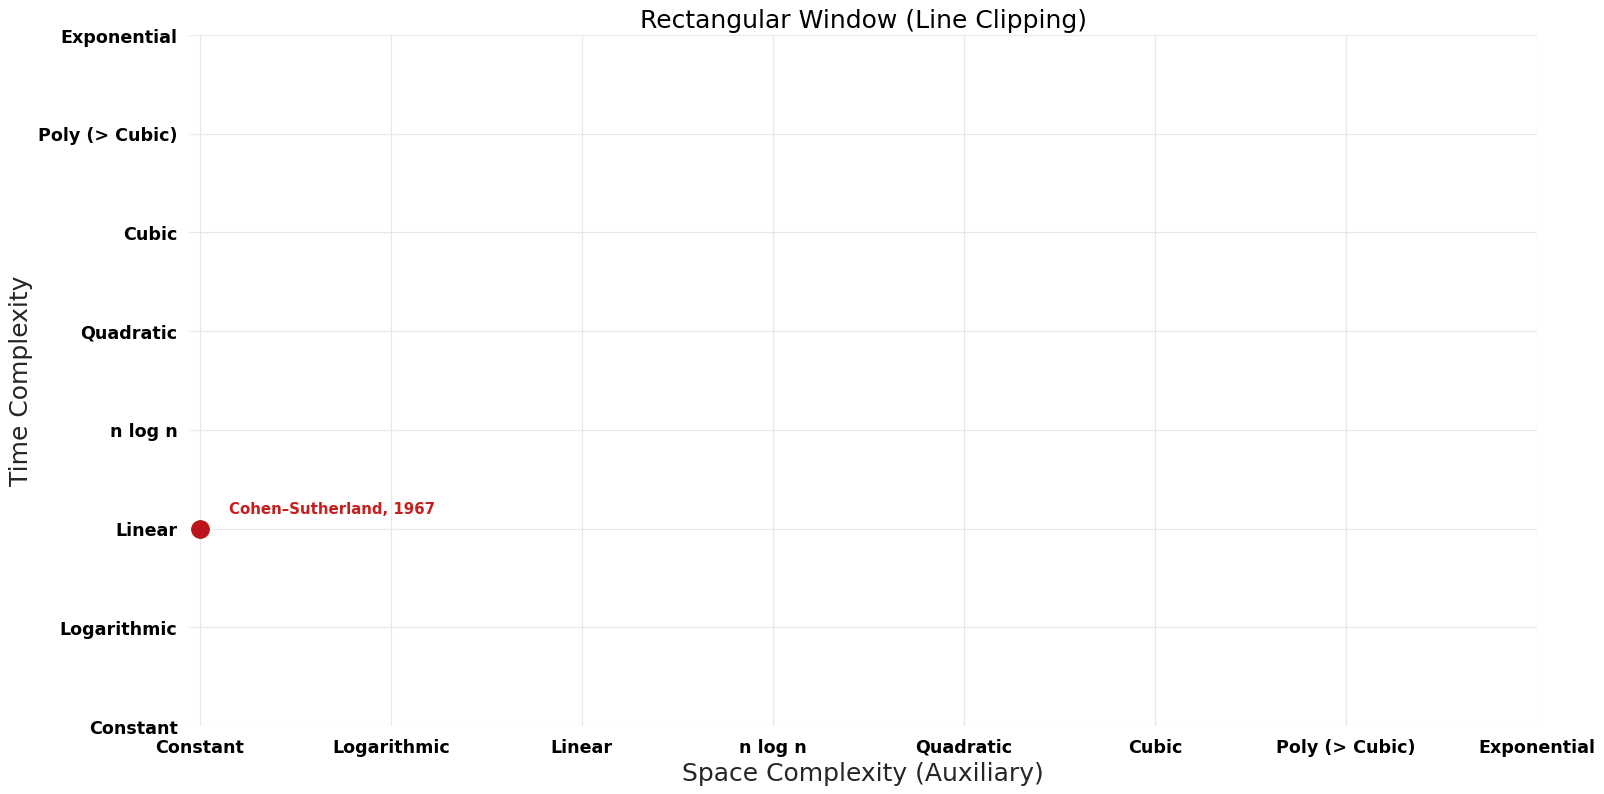 Line Clipping - Rectangular Window - Pareto Frontier.png